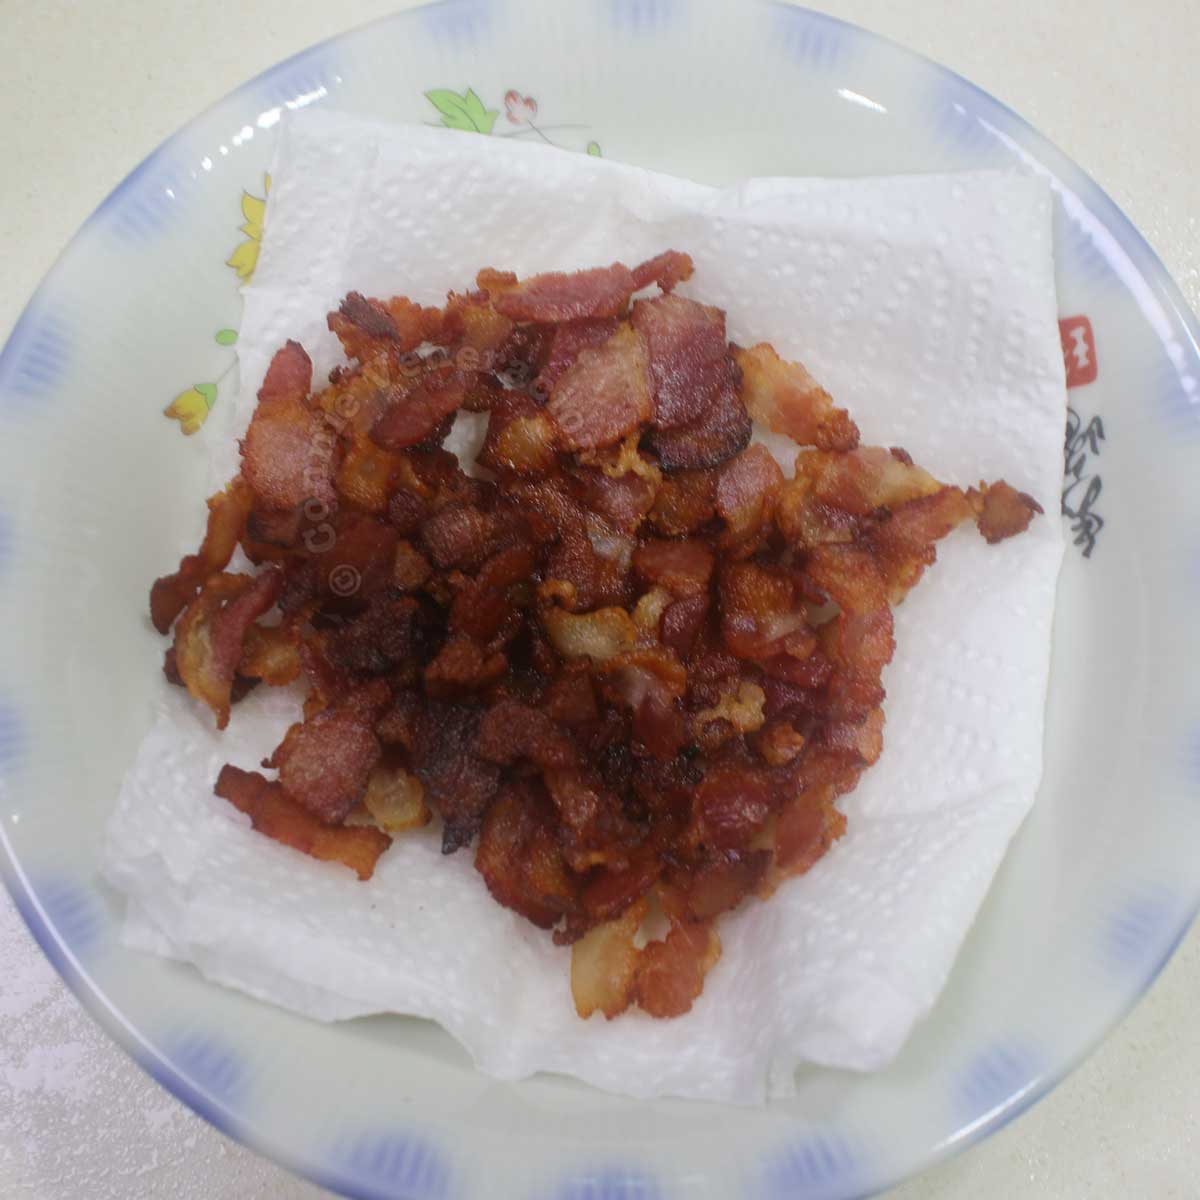 Chopped bacon in bowl lined with paper towel